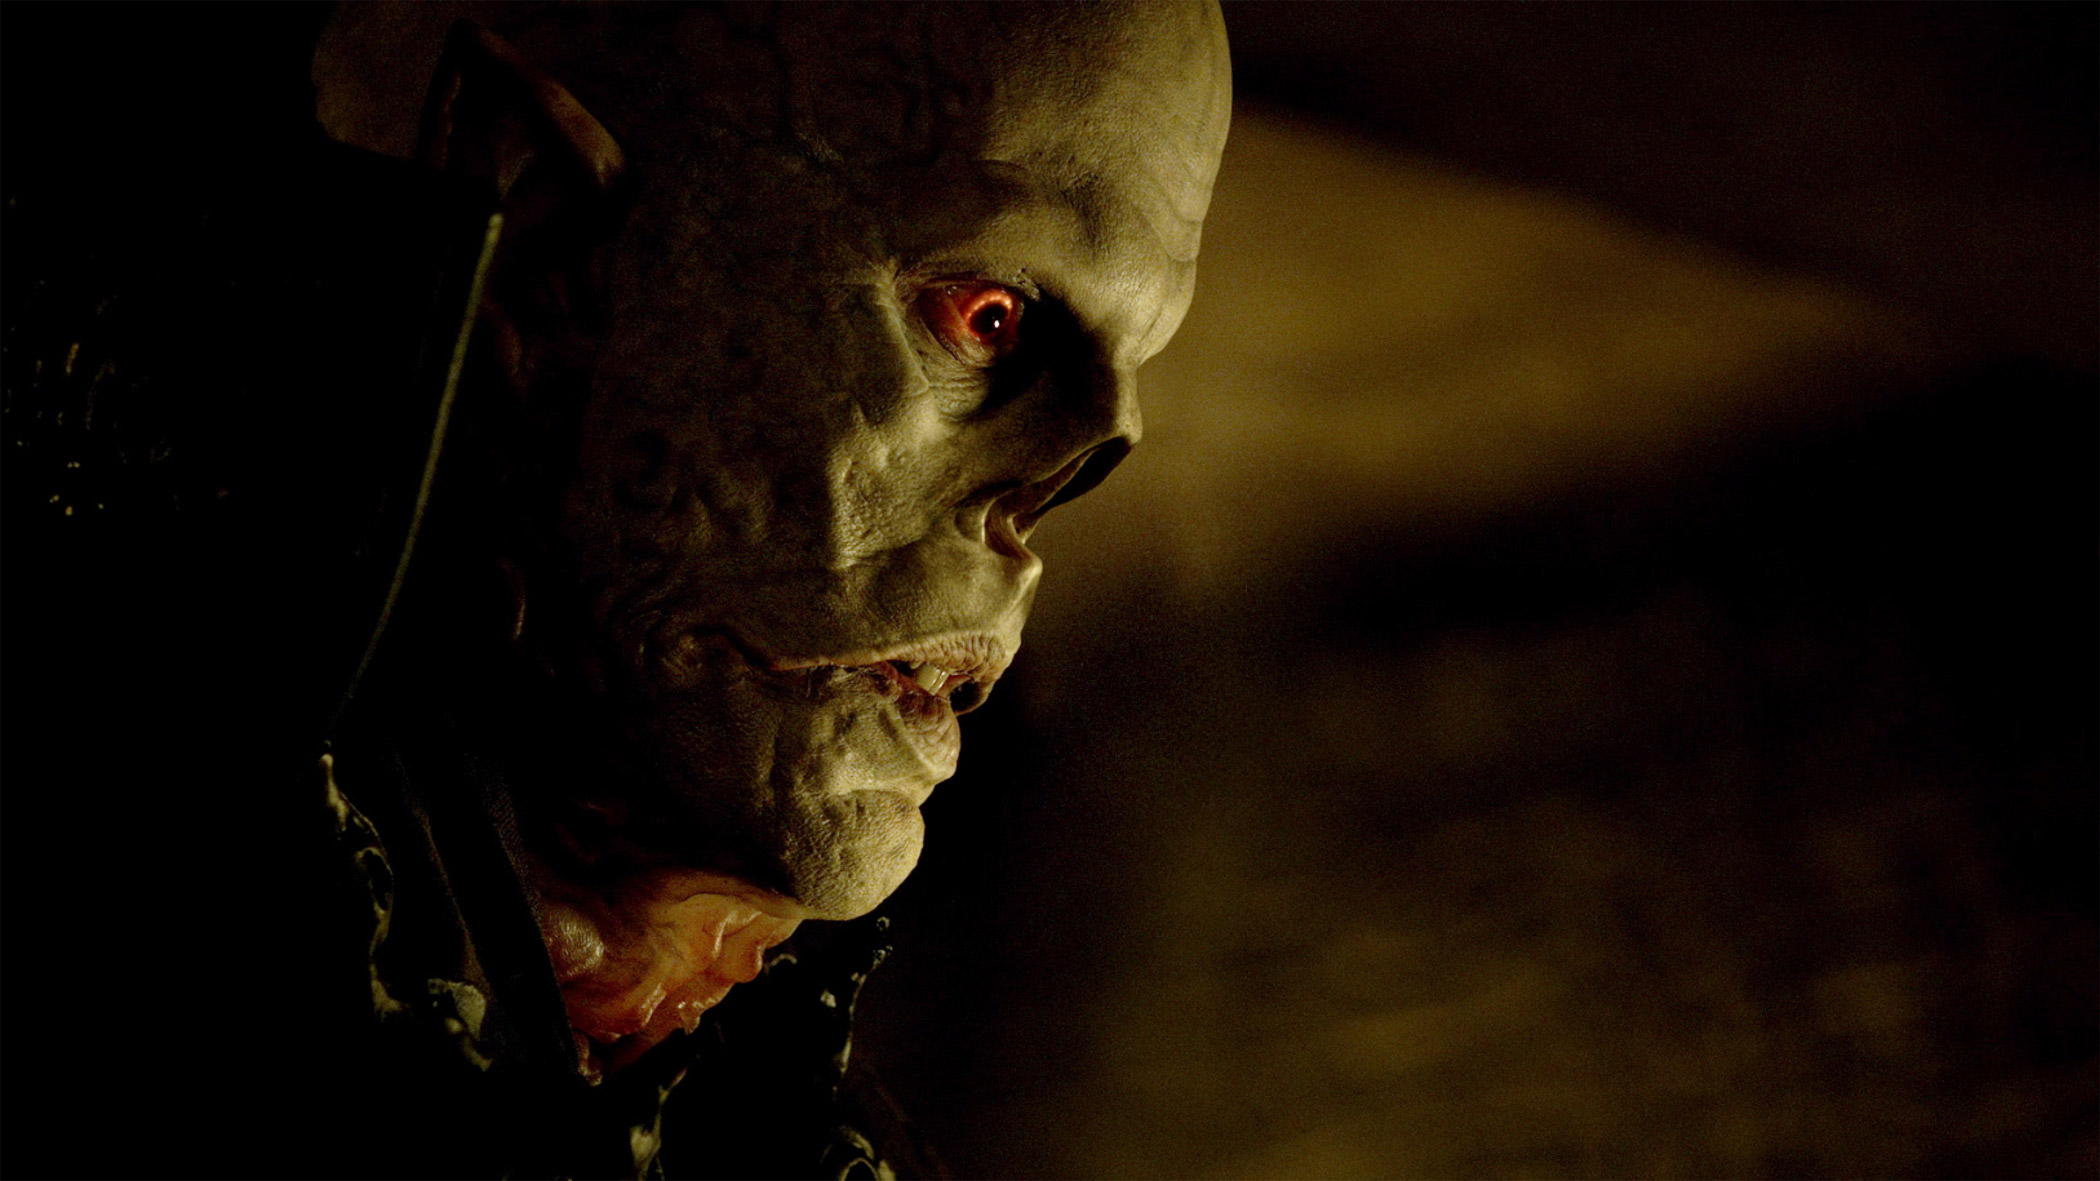 Robert Maillet as The Master in The Strain, 2014.